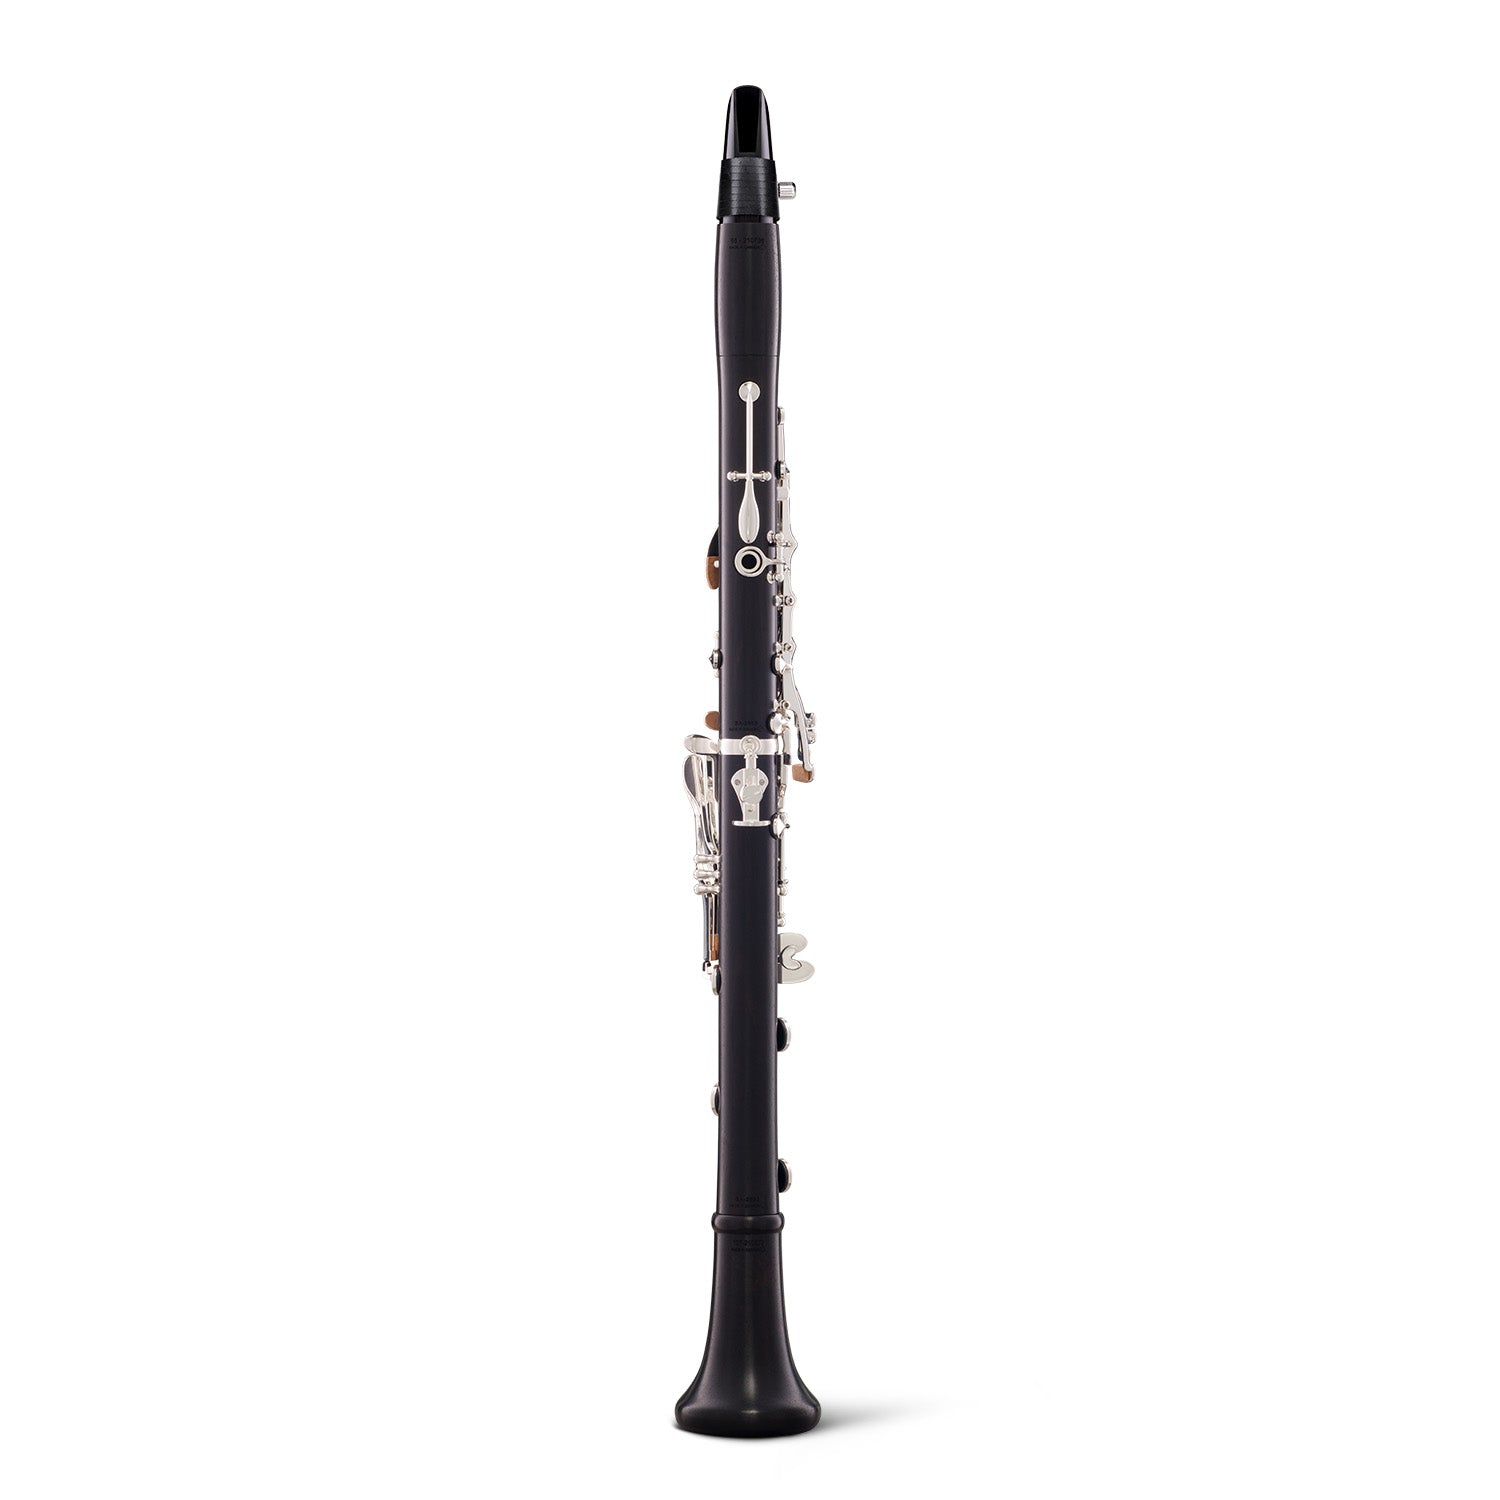 backun-bb-clarinet-beta-silver-with-eb-key-with-protege-mouthpiece-and-rovner-back